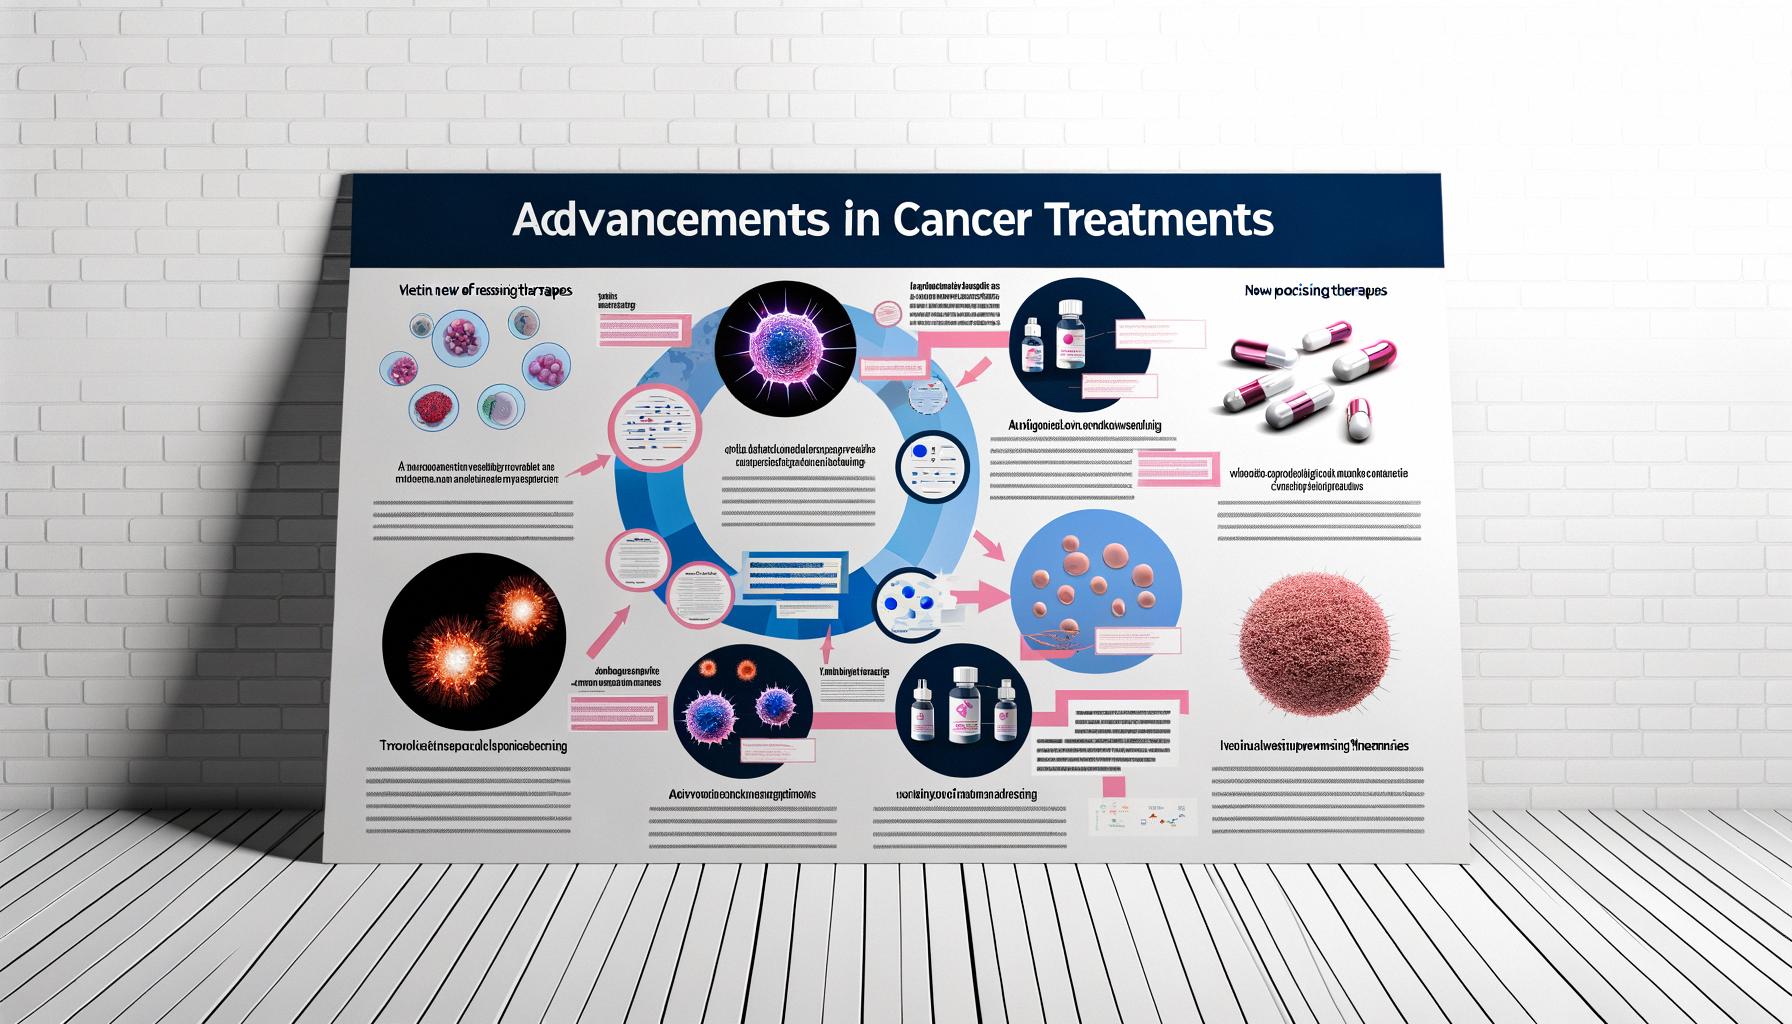 New therapies target cancer more precisely, with fewer side effects.